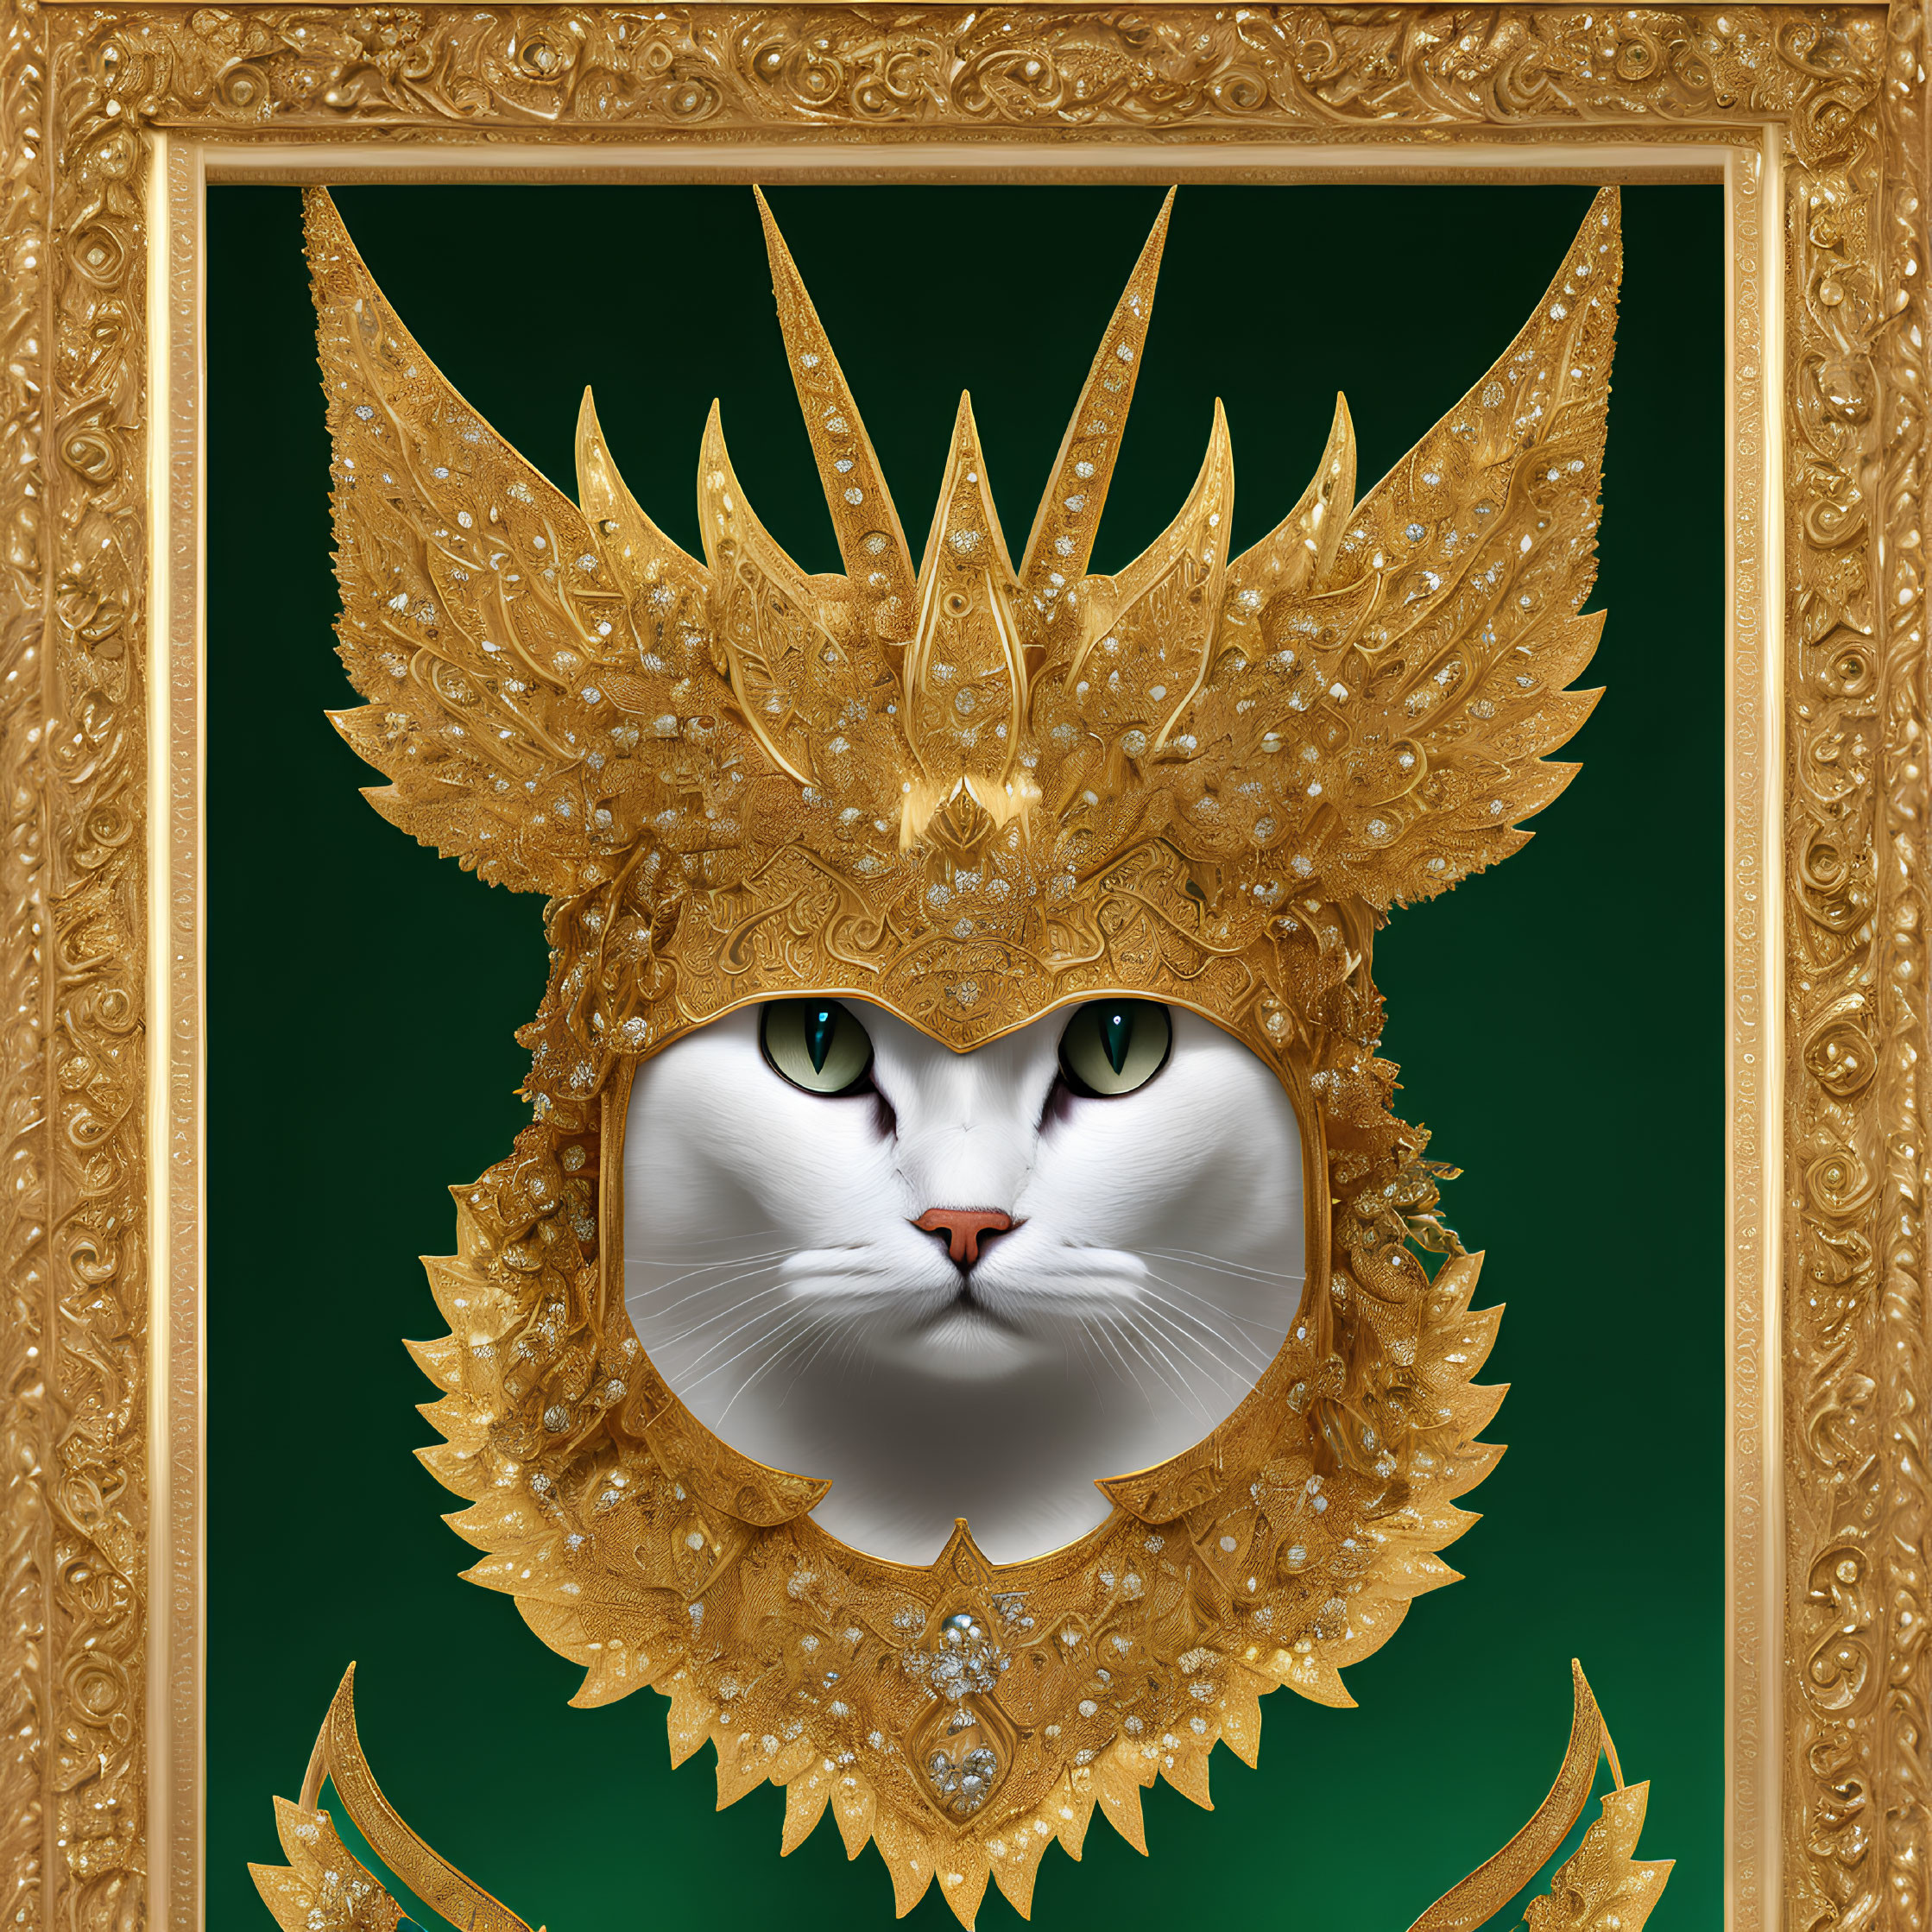 Golden frame with majestic cat illustration on green background